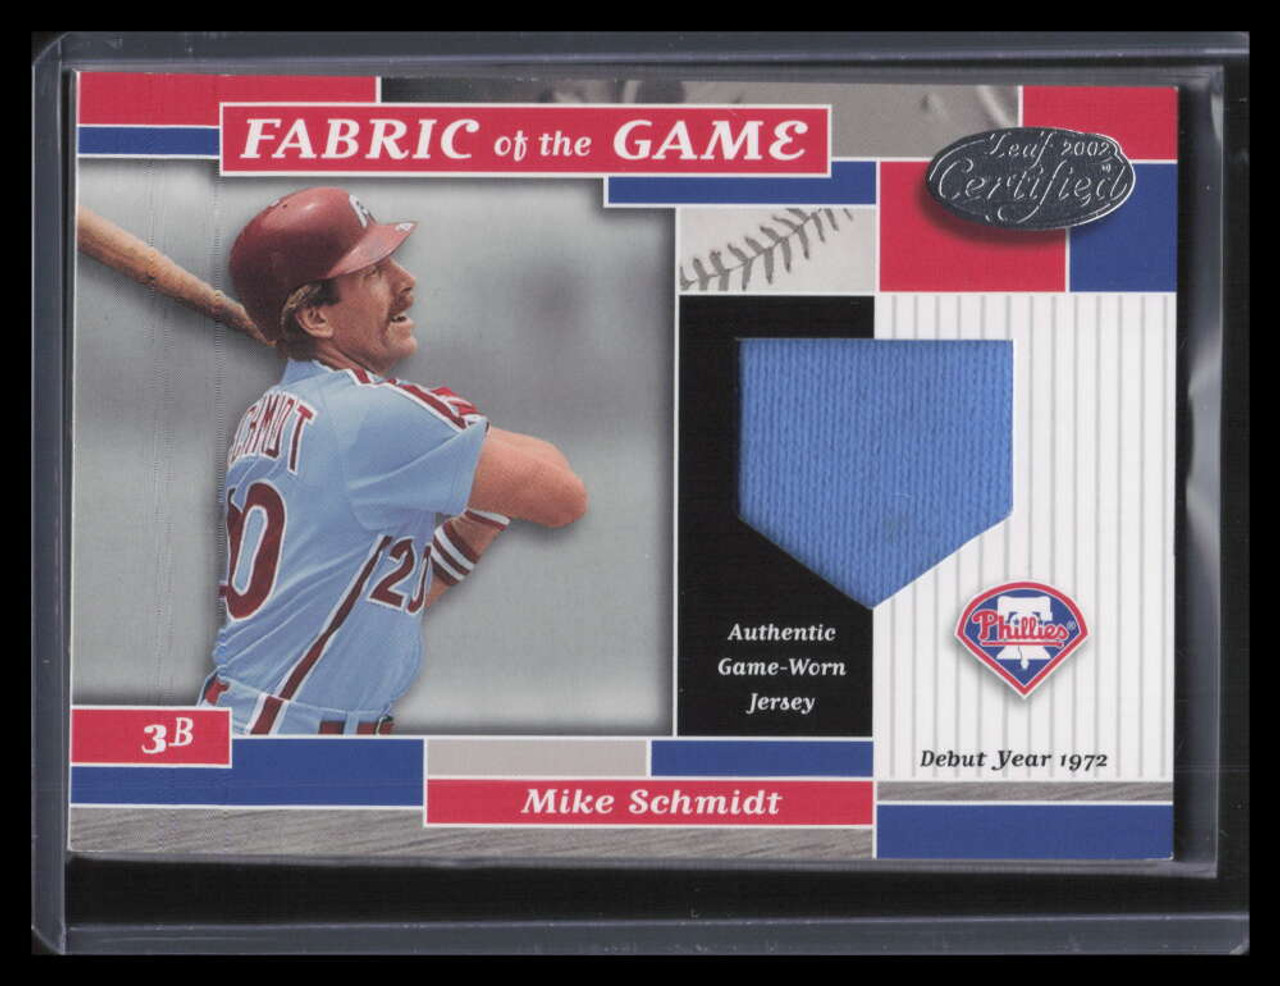 2002 Leaf Certified Fabric of the Game 38dy Mike Schmidt Jersey 61